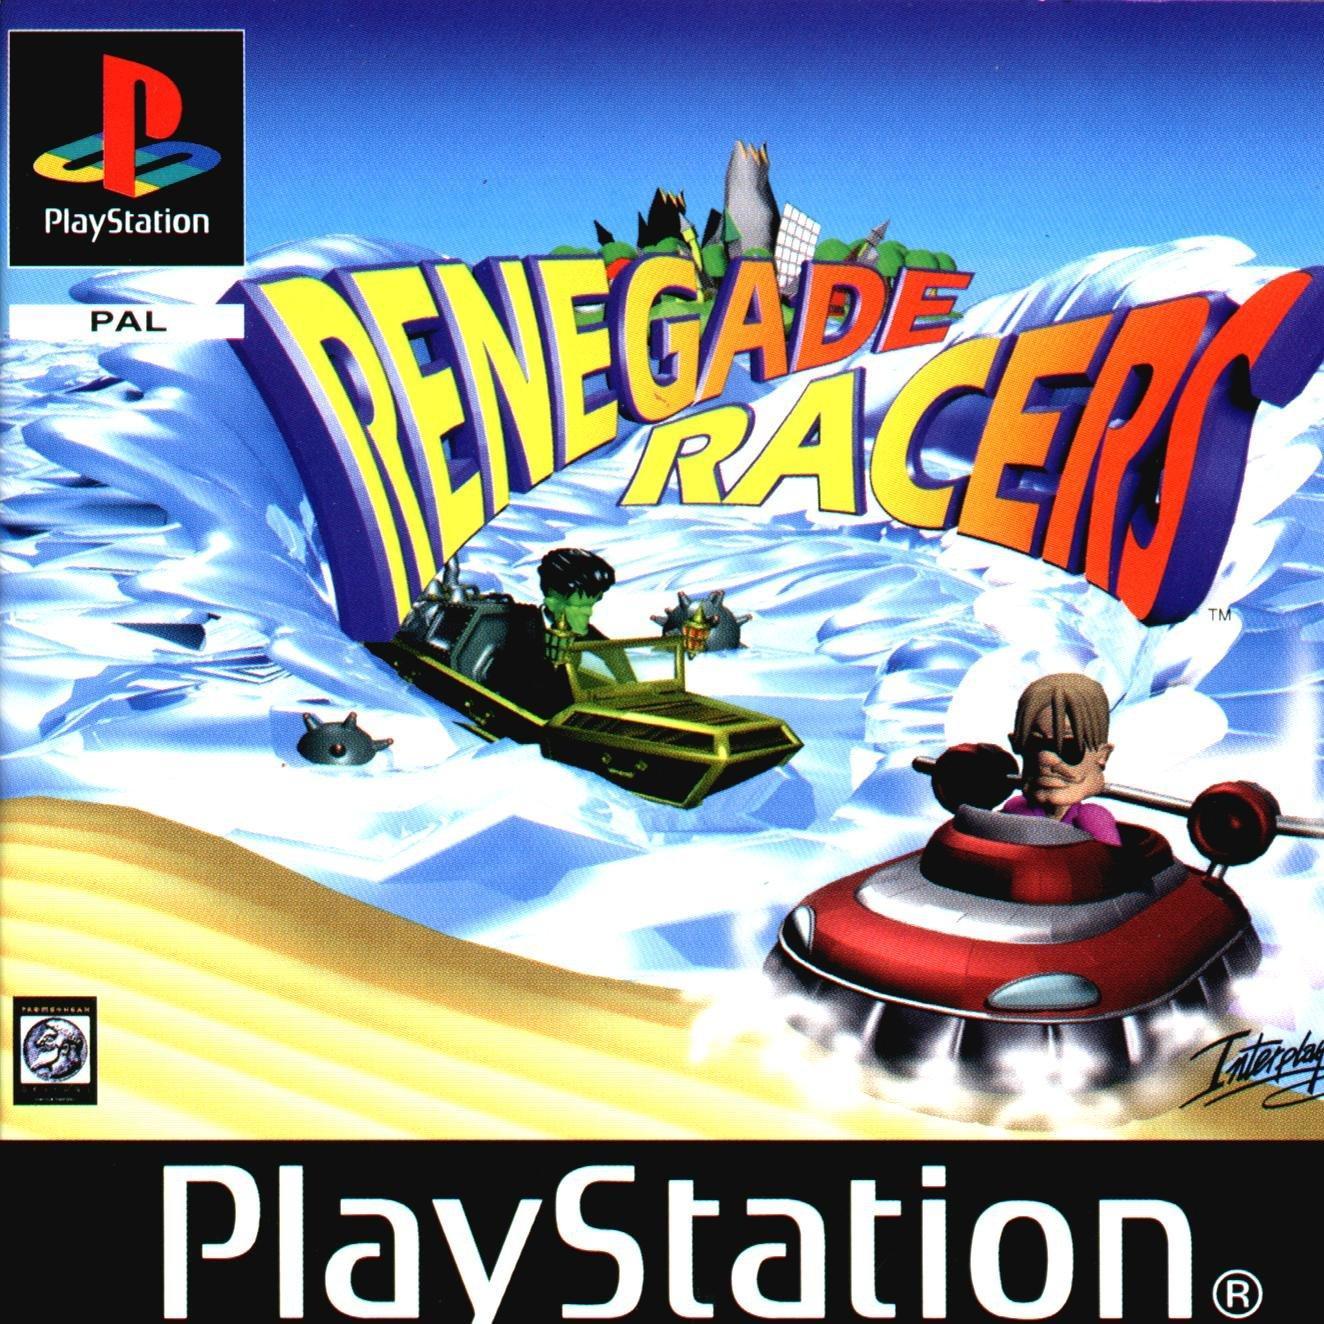 Renegade Racers for psx 